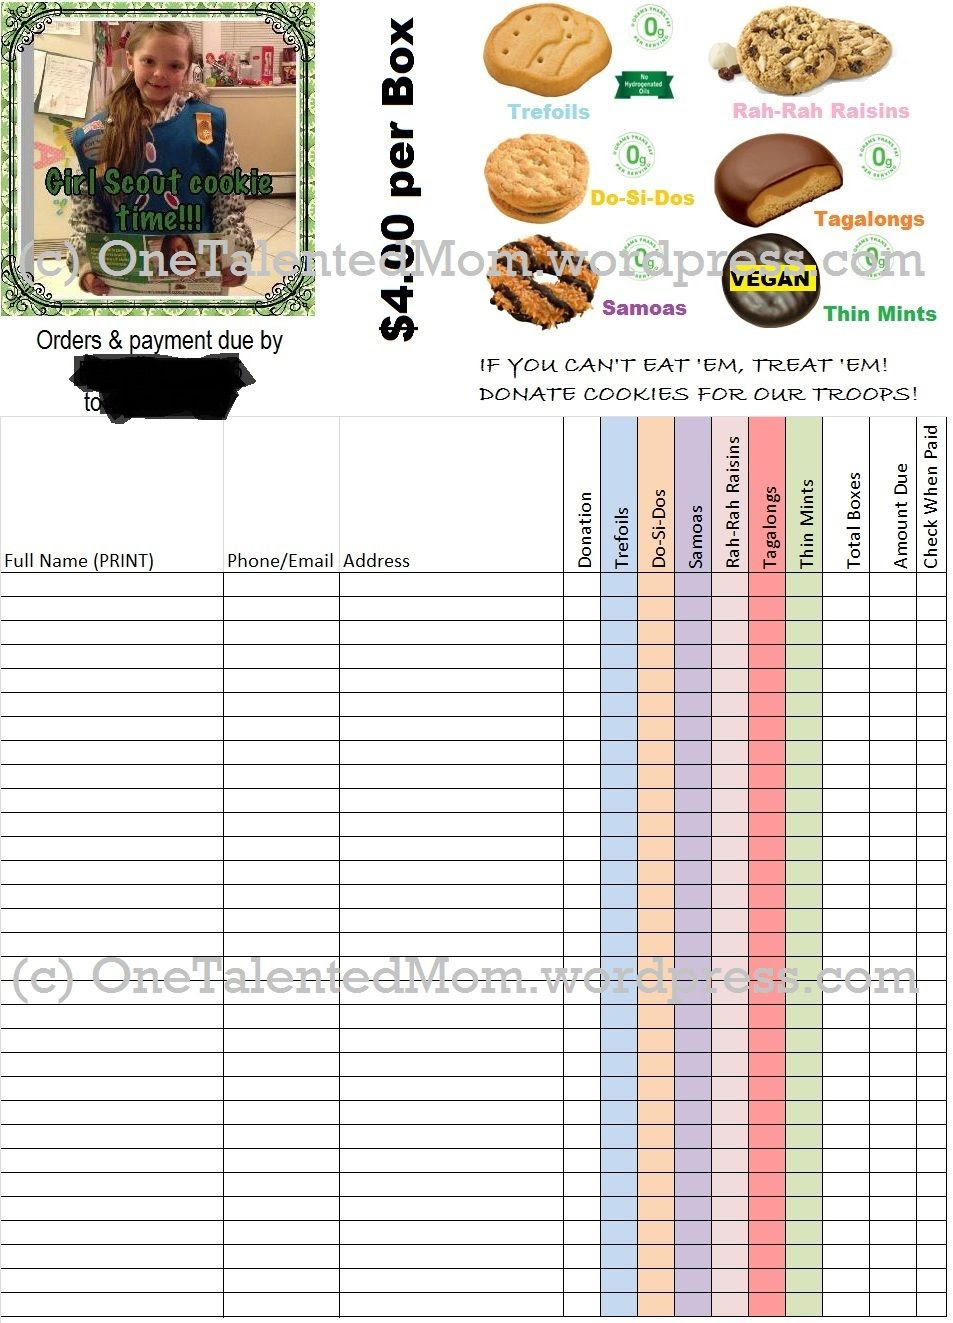 Girl Scout Cookie Order Form 2021 Printable Pdf Printable Form 2021